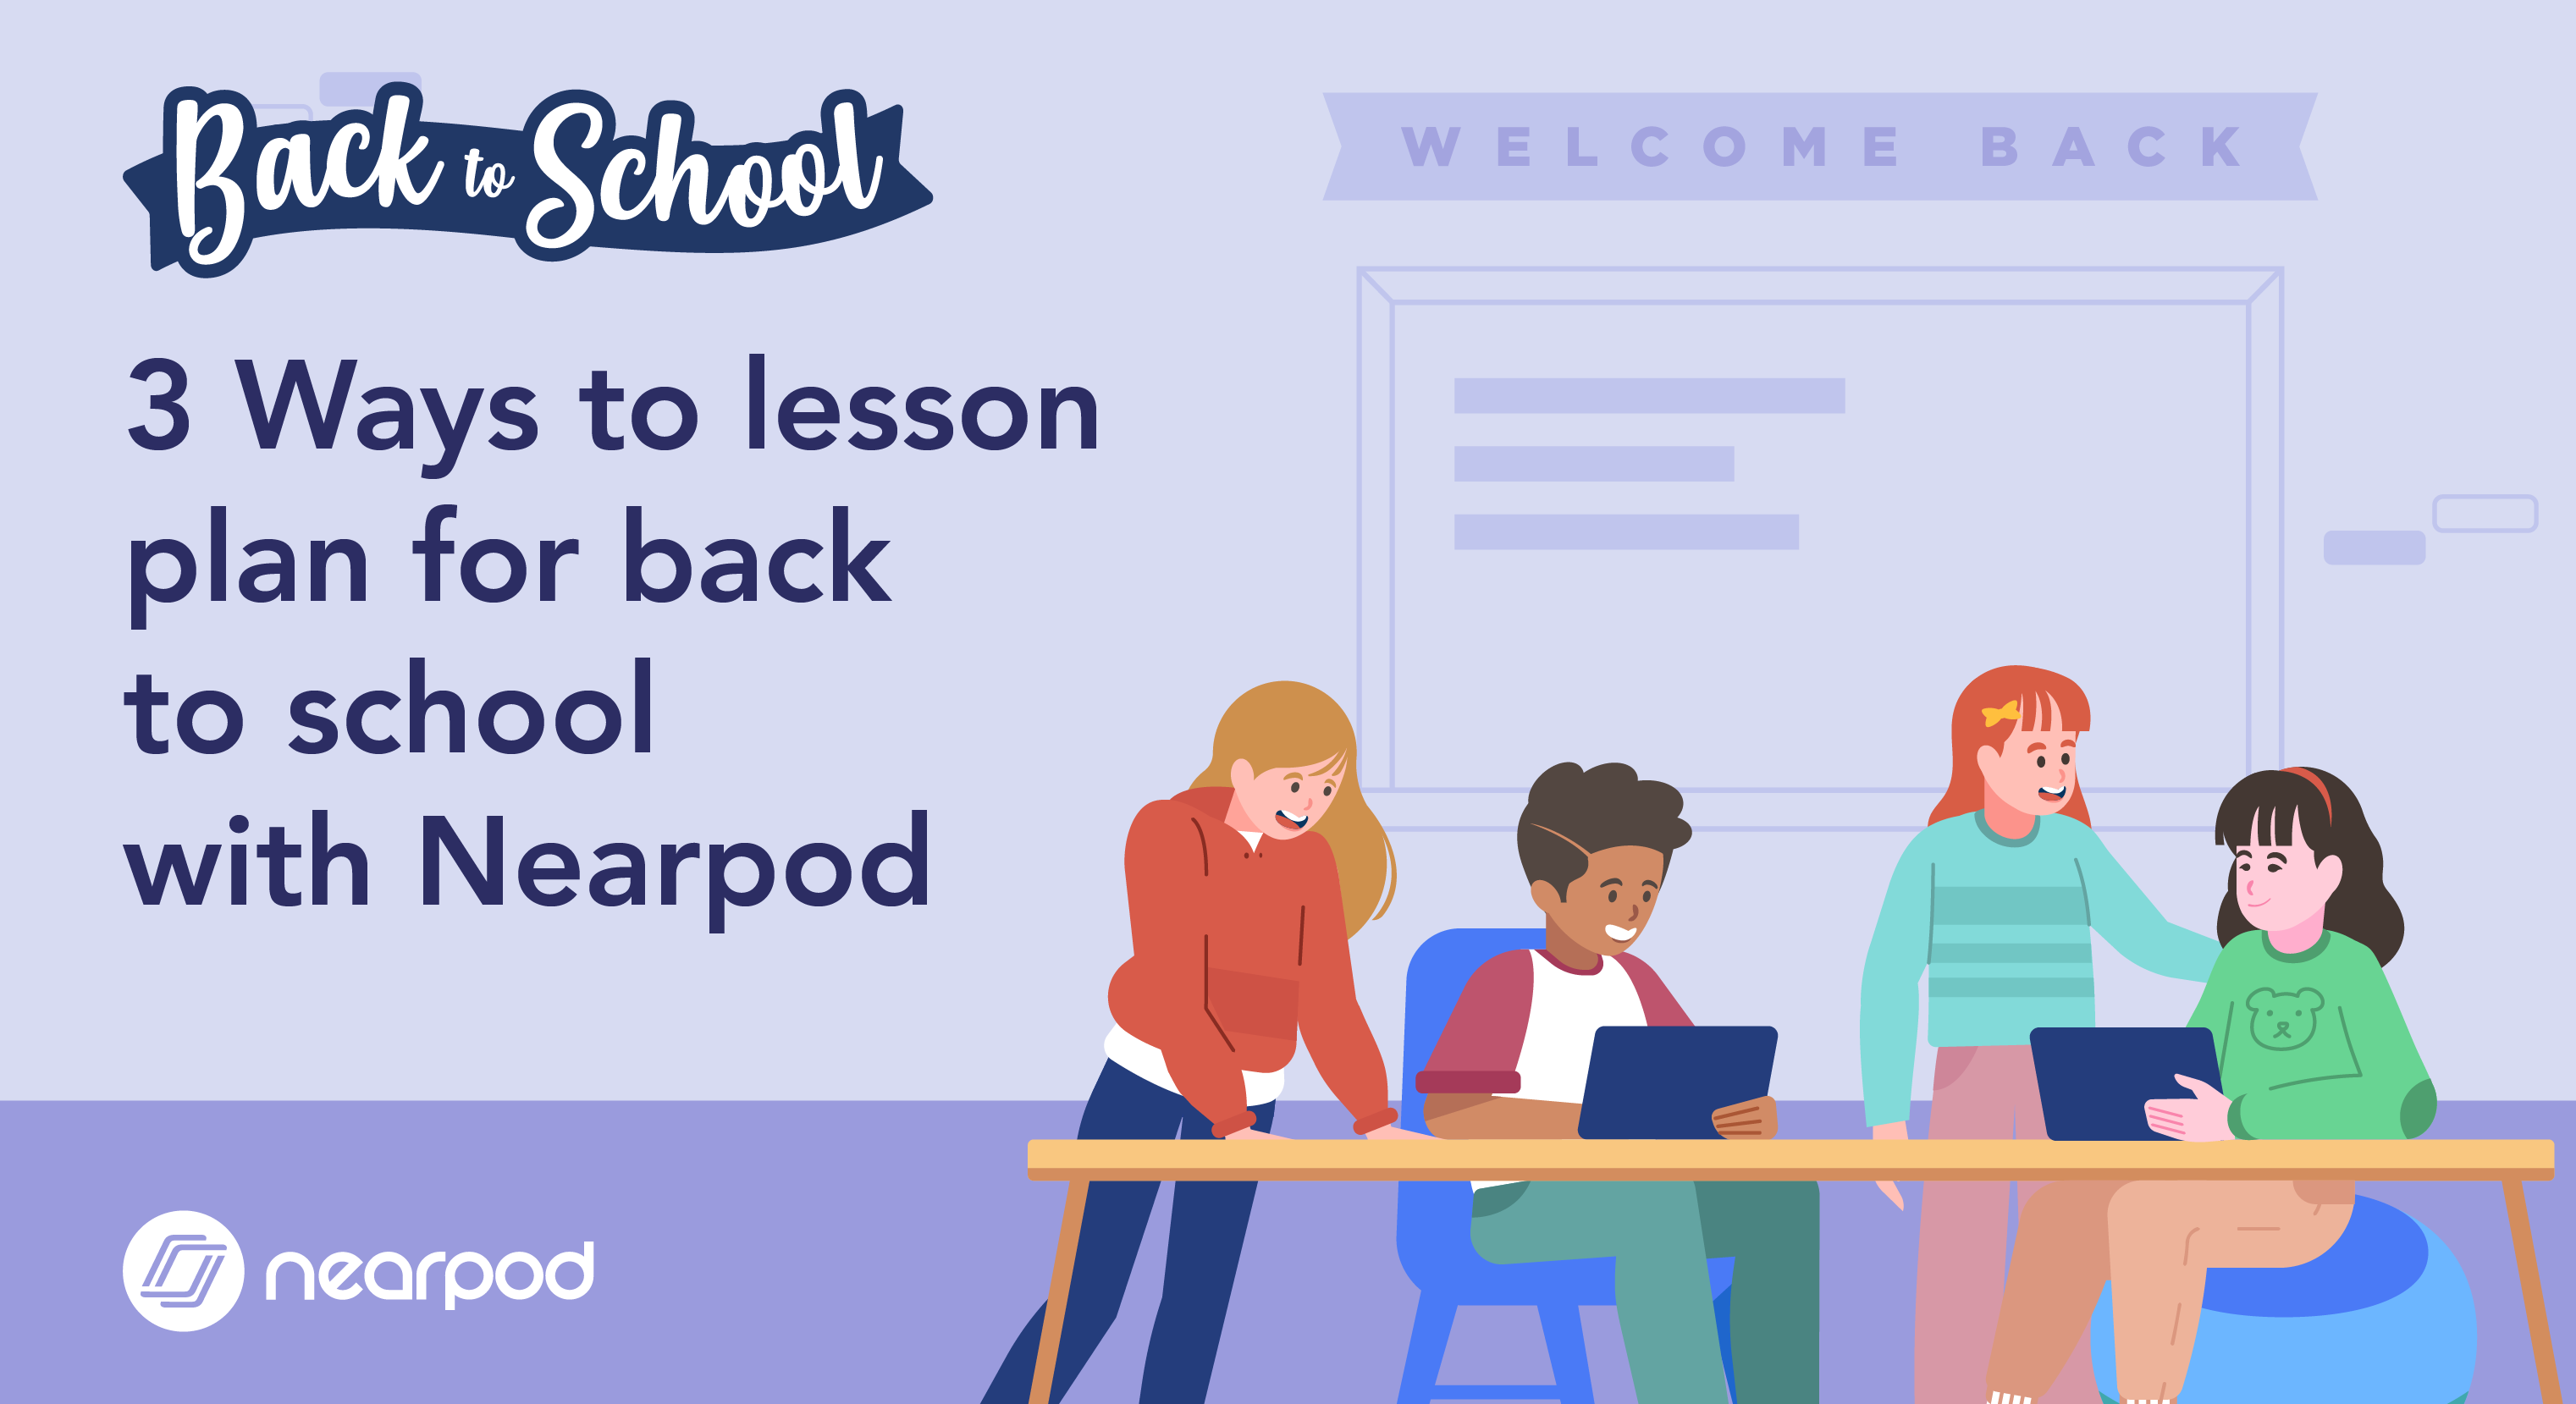 3 ways to lesson plan for back to school with Nearpod